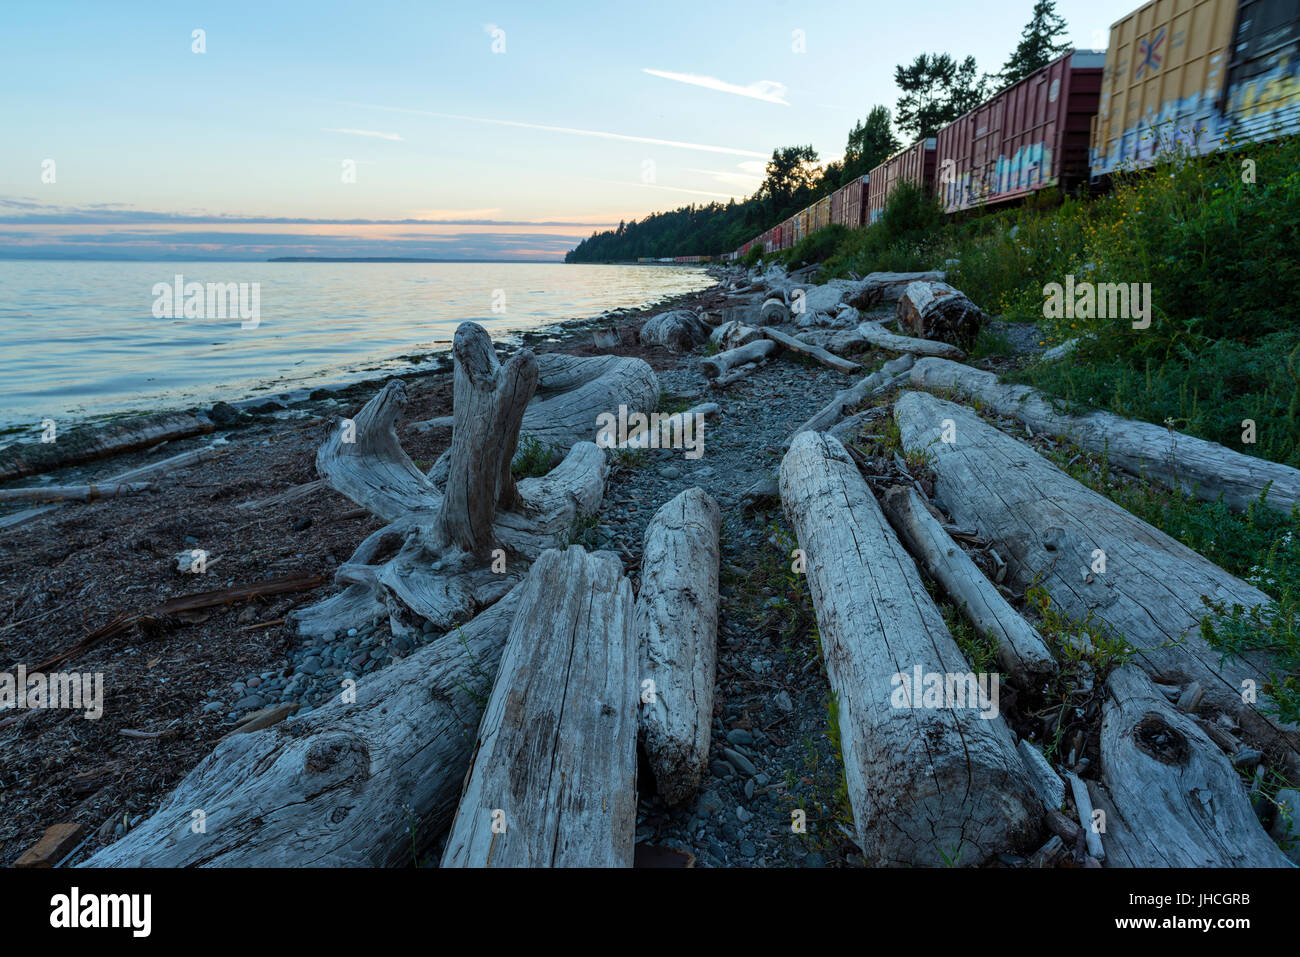 Landscapes and Waterscapes of the Pacific North West of British Columbia Canada. Stock Photo